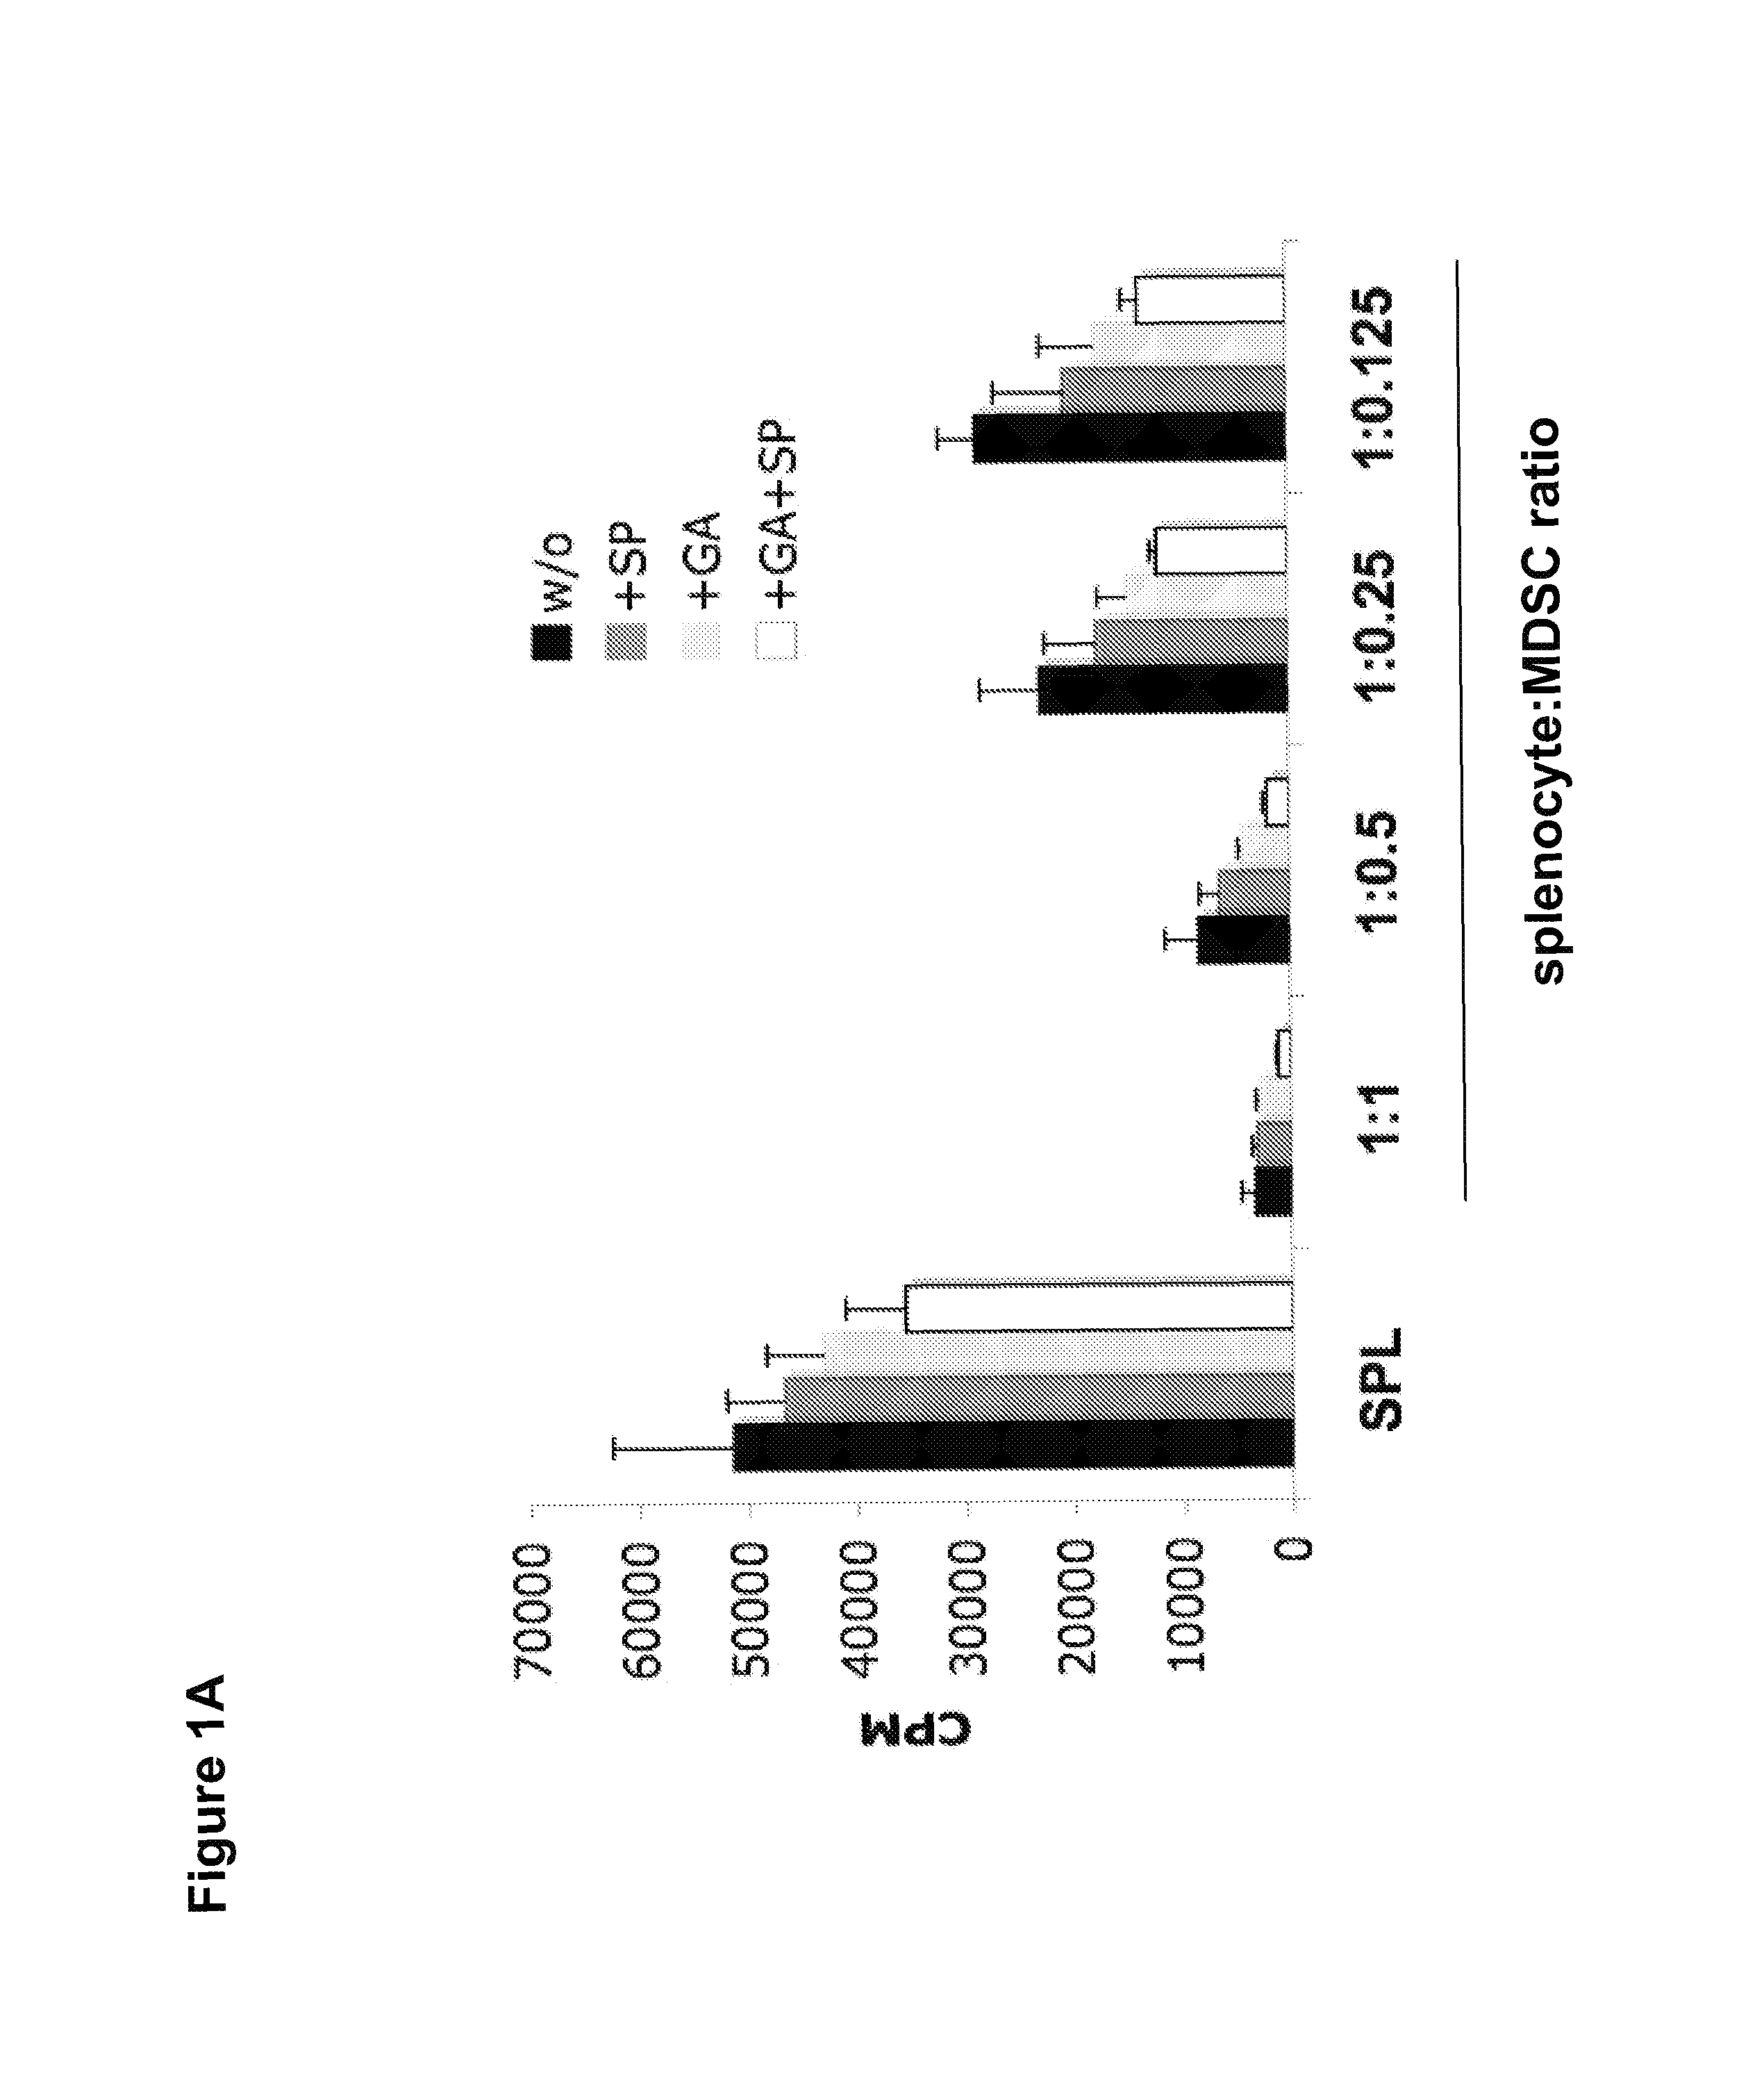 Methods of using small compounds to enhance myeloid derived suppressor cell function for treating autoimmune diseases